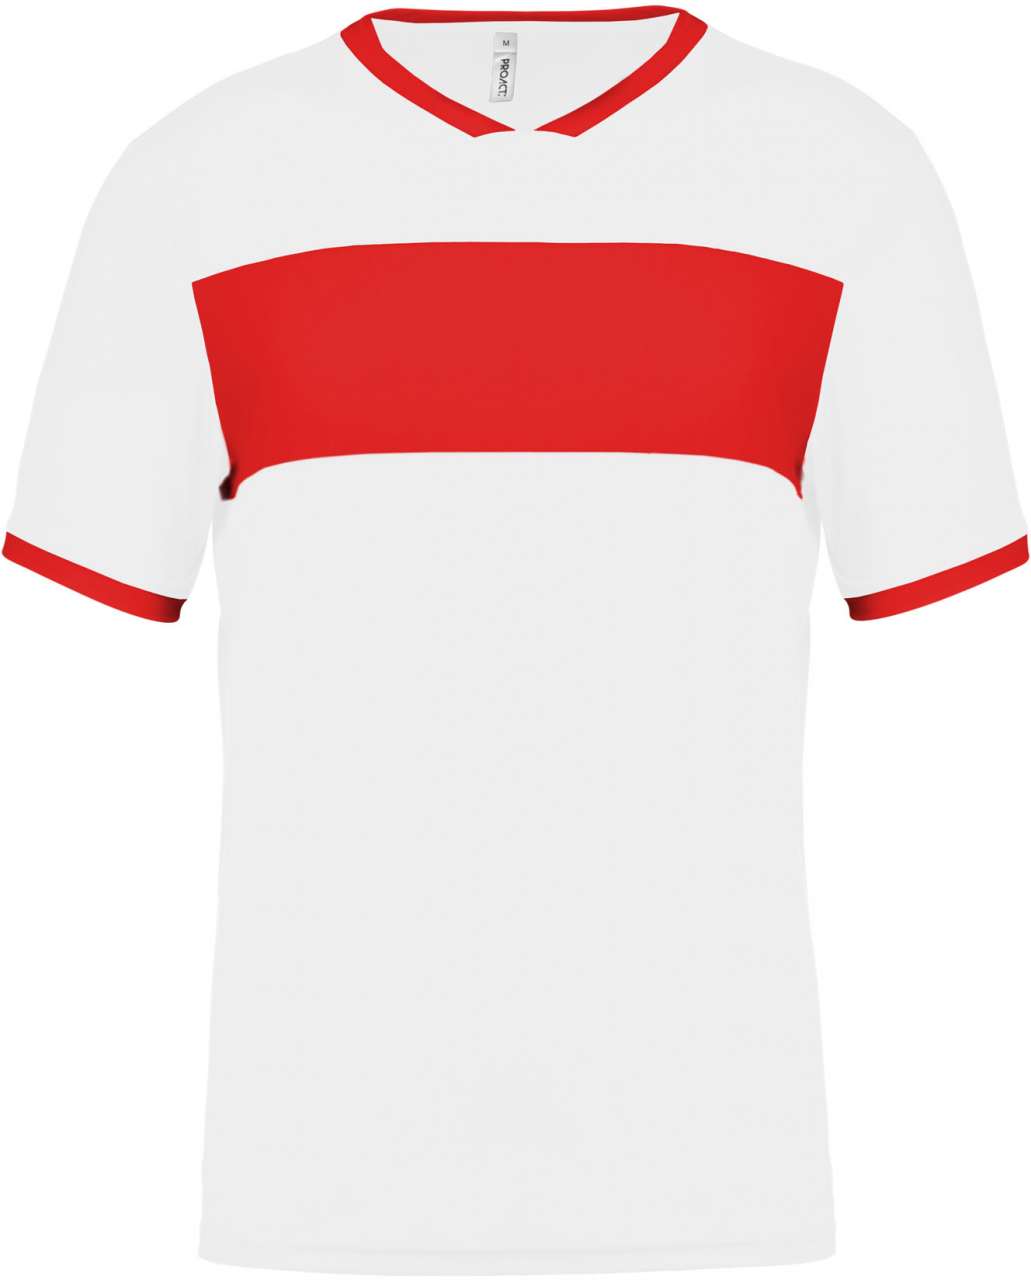 Promo  ADULTS' SHORT-SLEEVED JERSEY